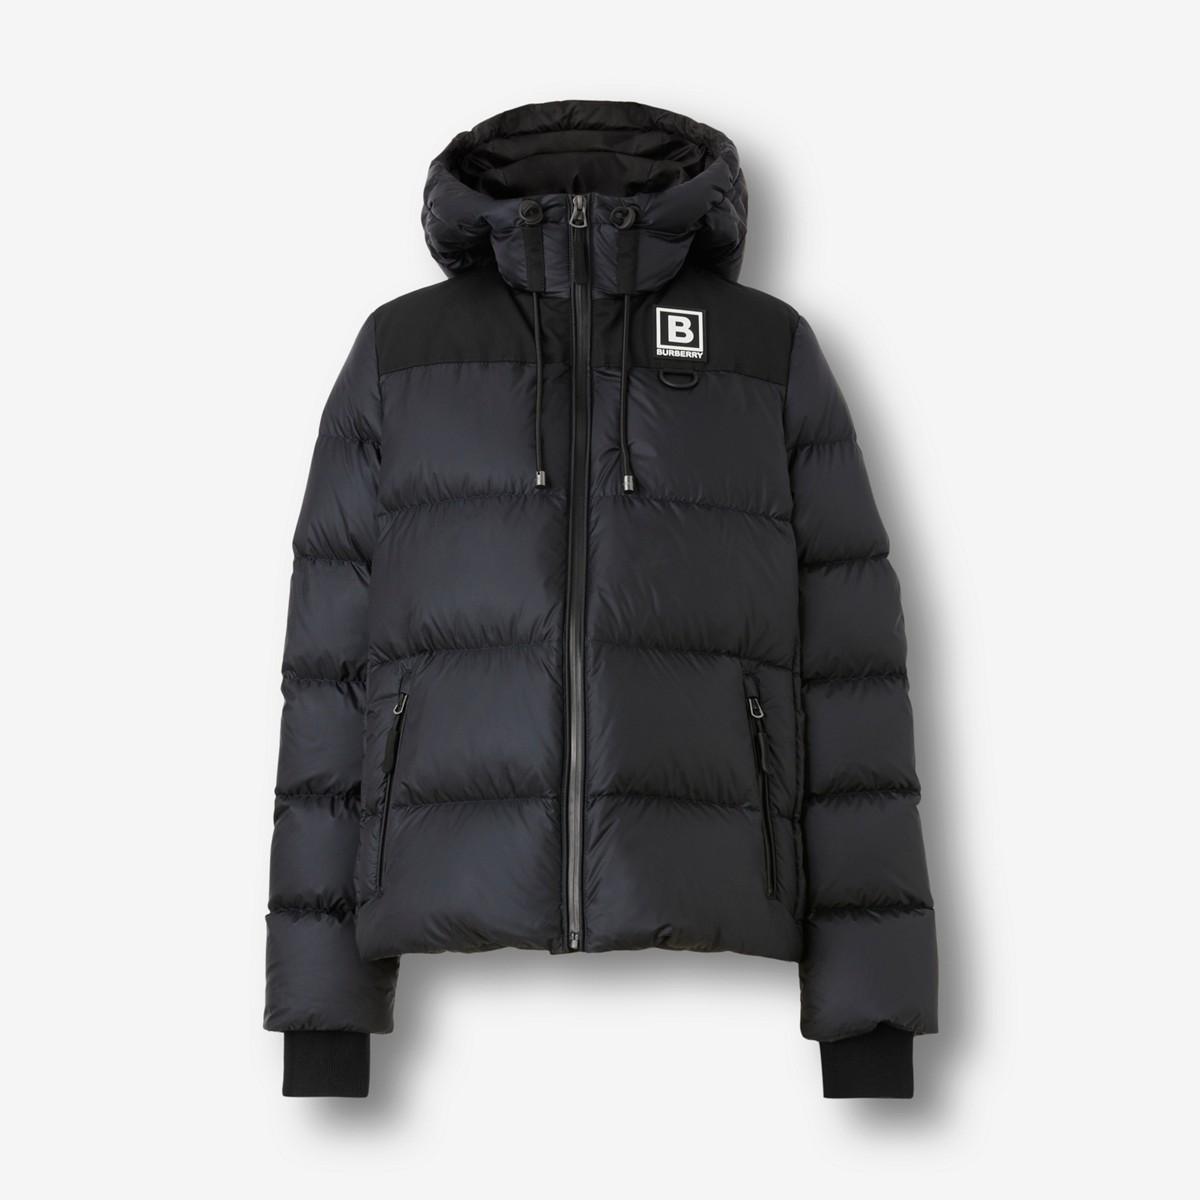 Burberry Letter Graphic Appliqué Nylon Hooded Puffer Jacket in Black | Lyst